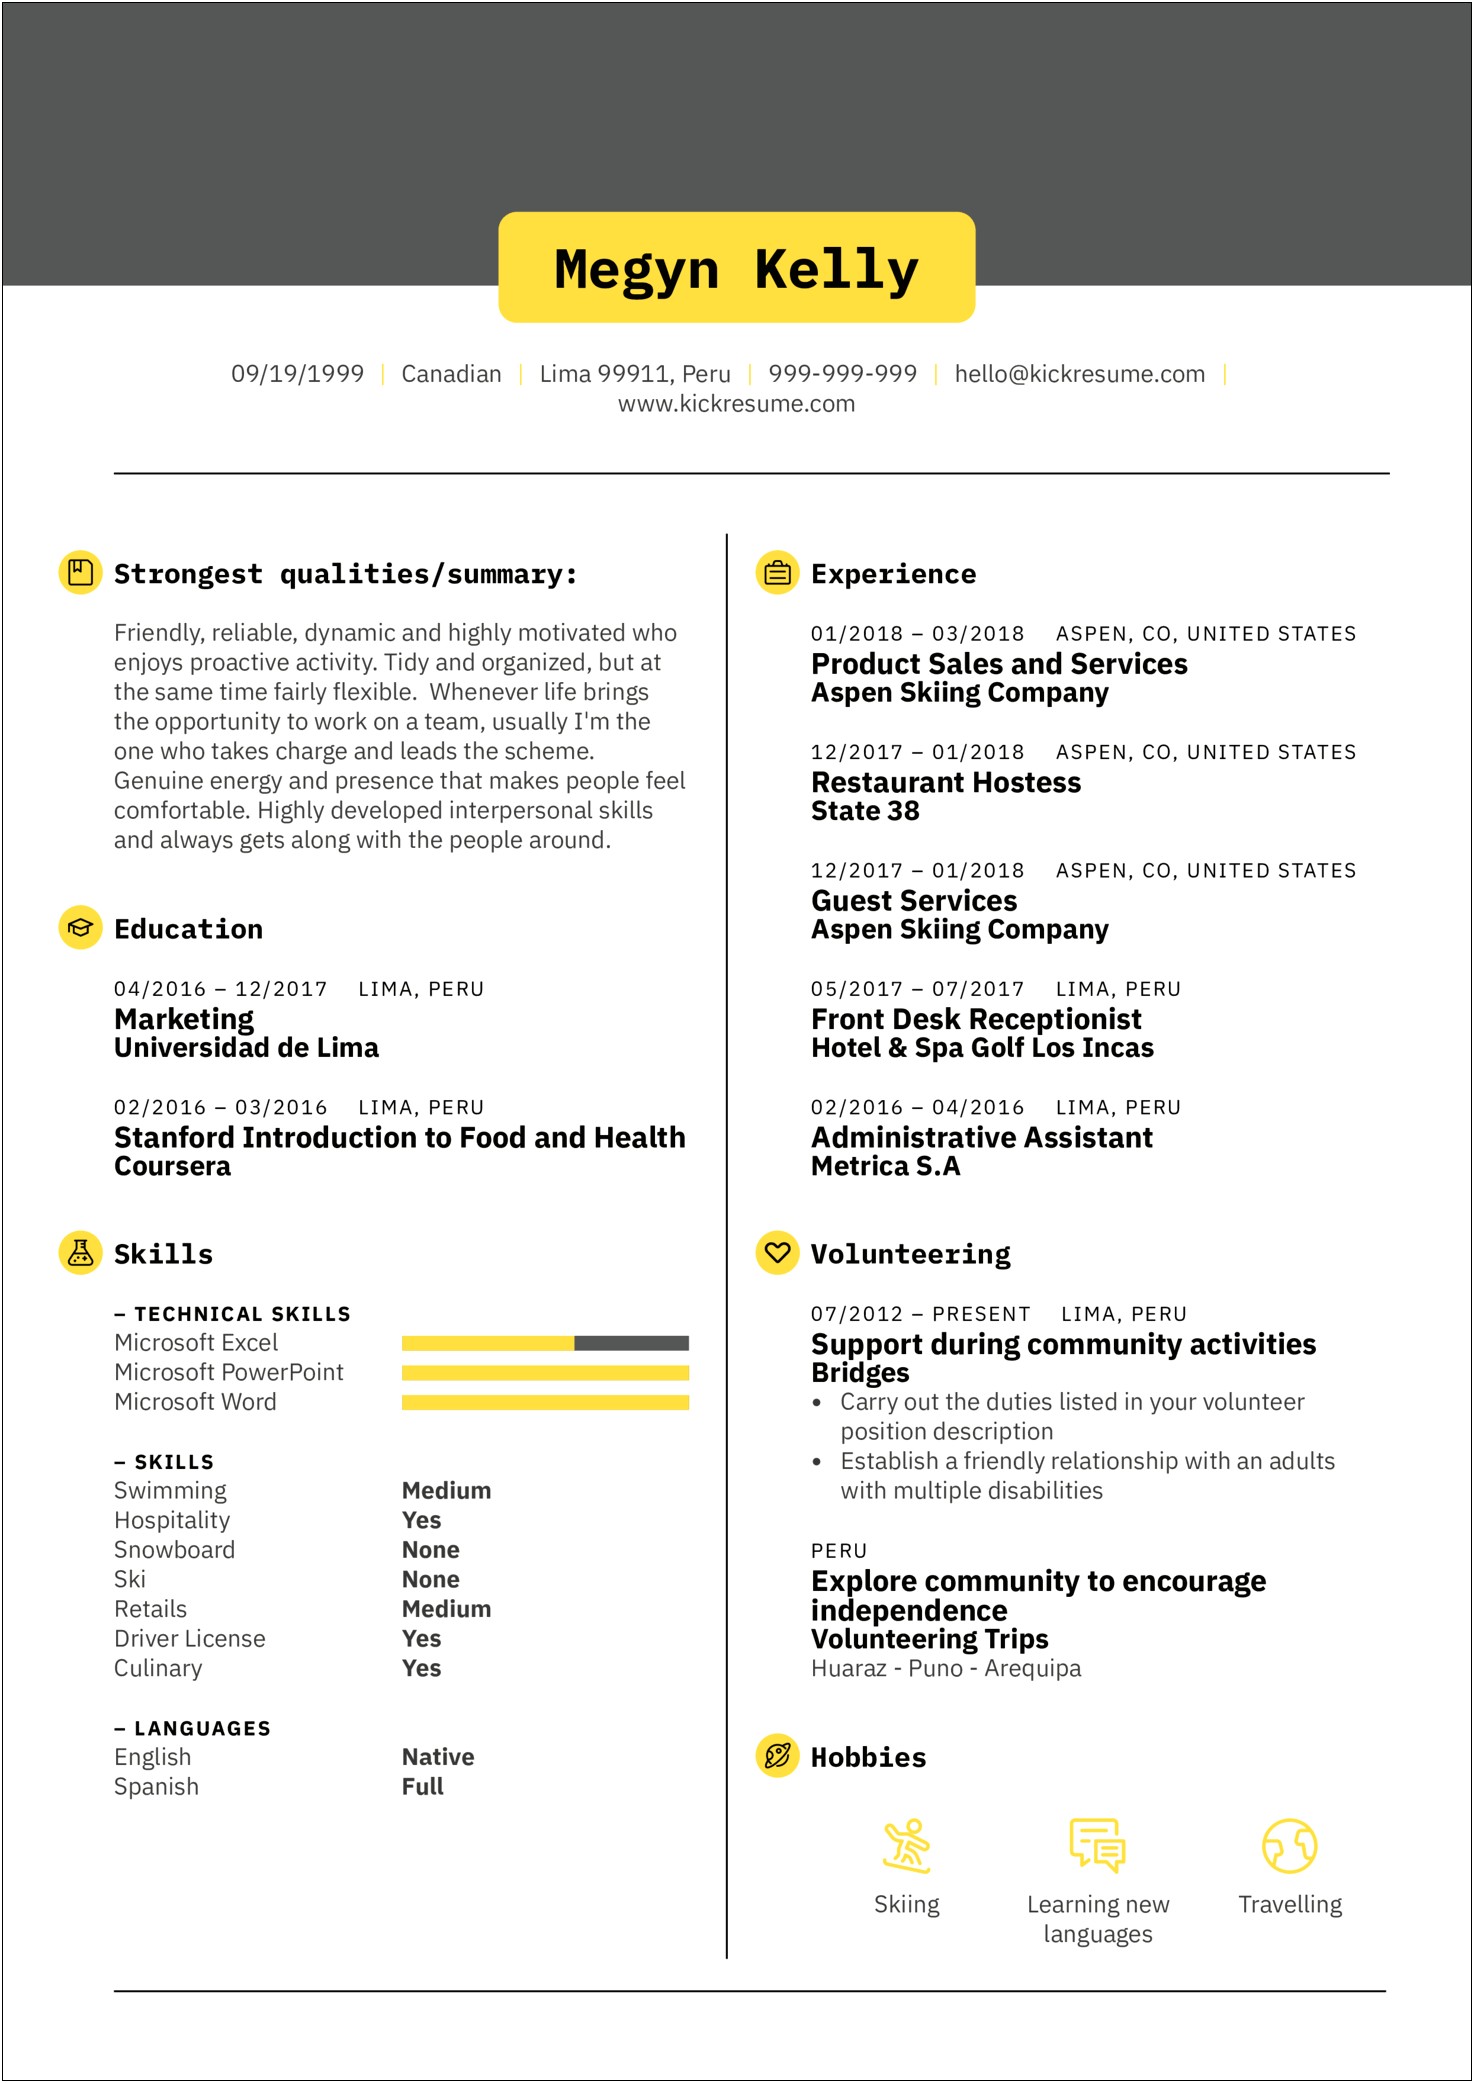 Resume Summary Examples For Spa Receptionist